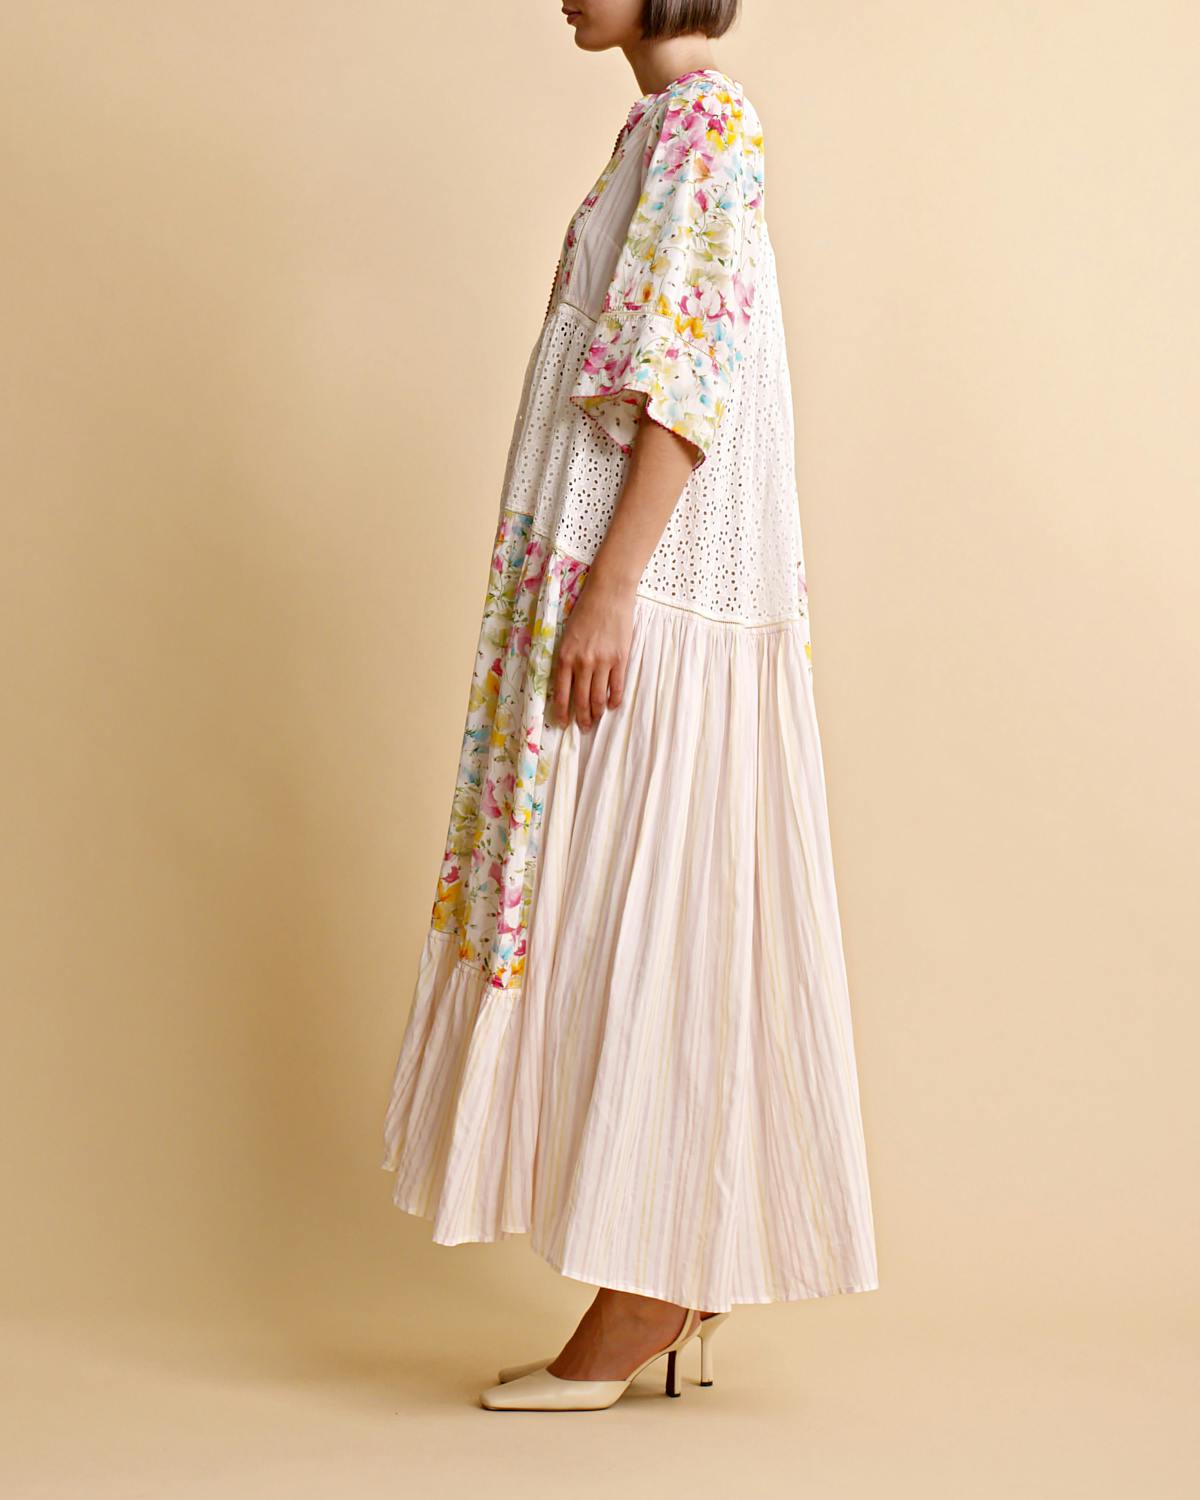 Patchwork Maxi Dress, Bright Flowers. Image #3